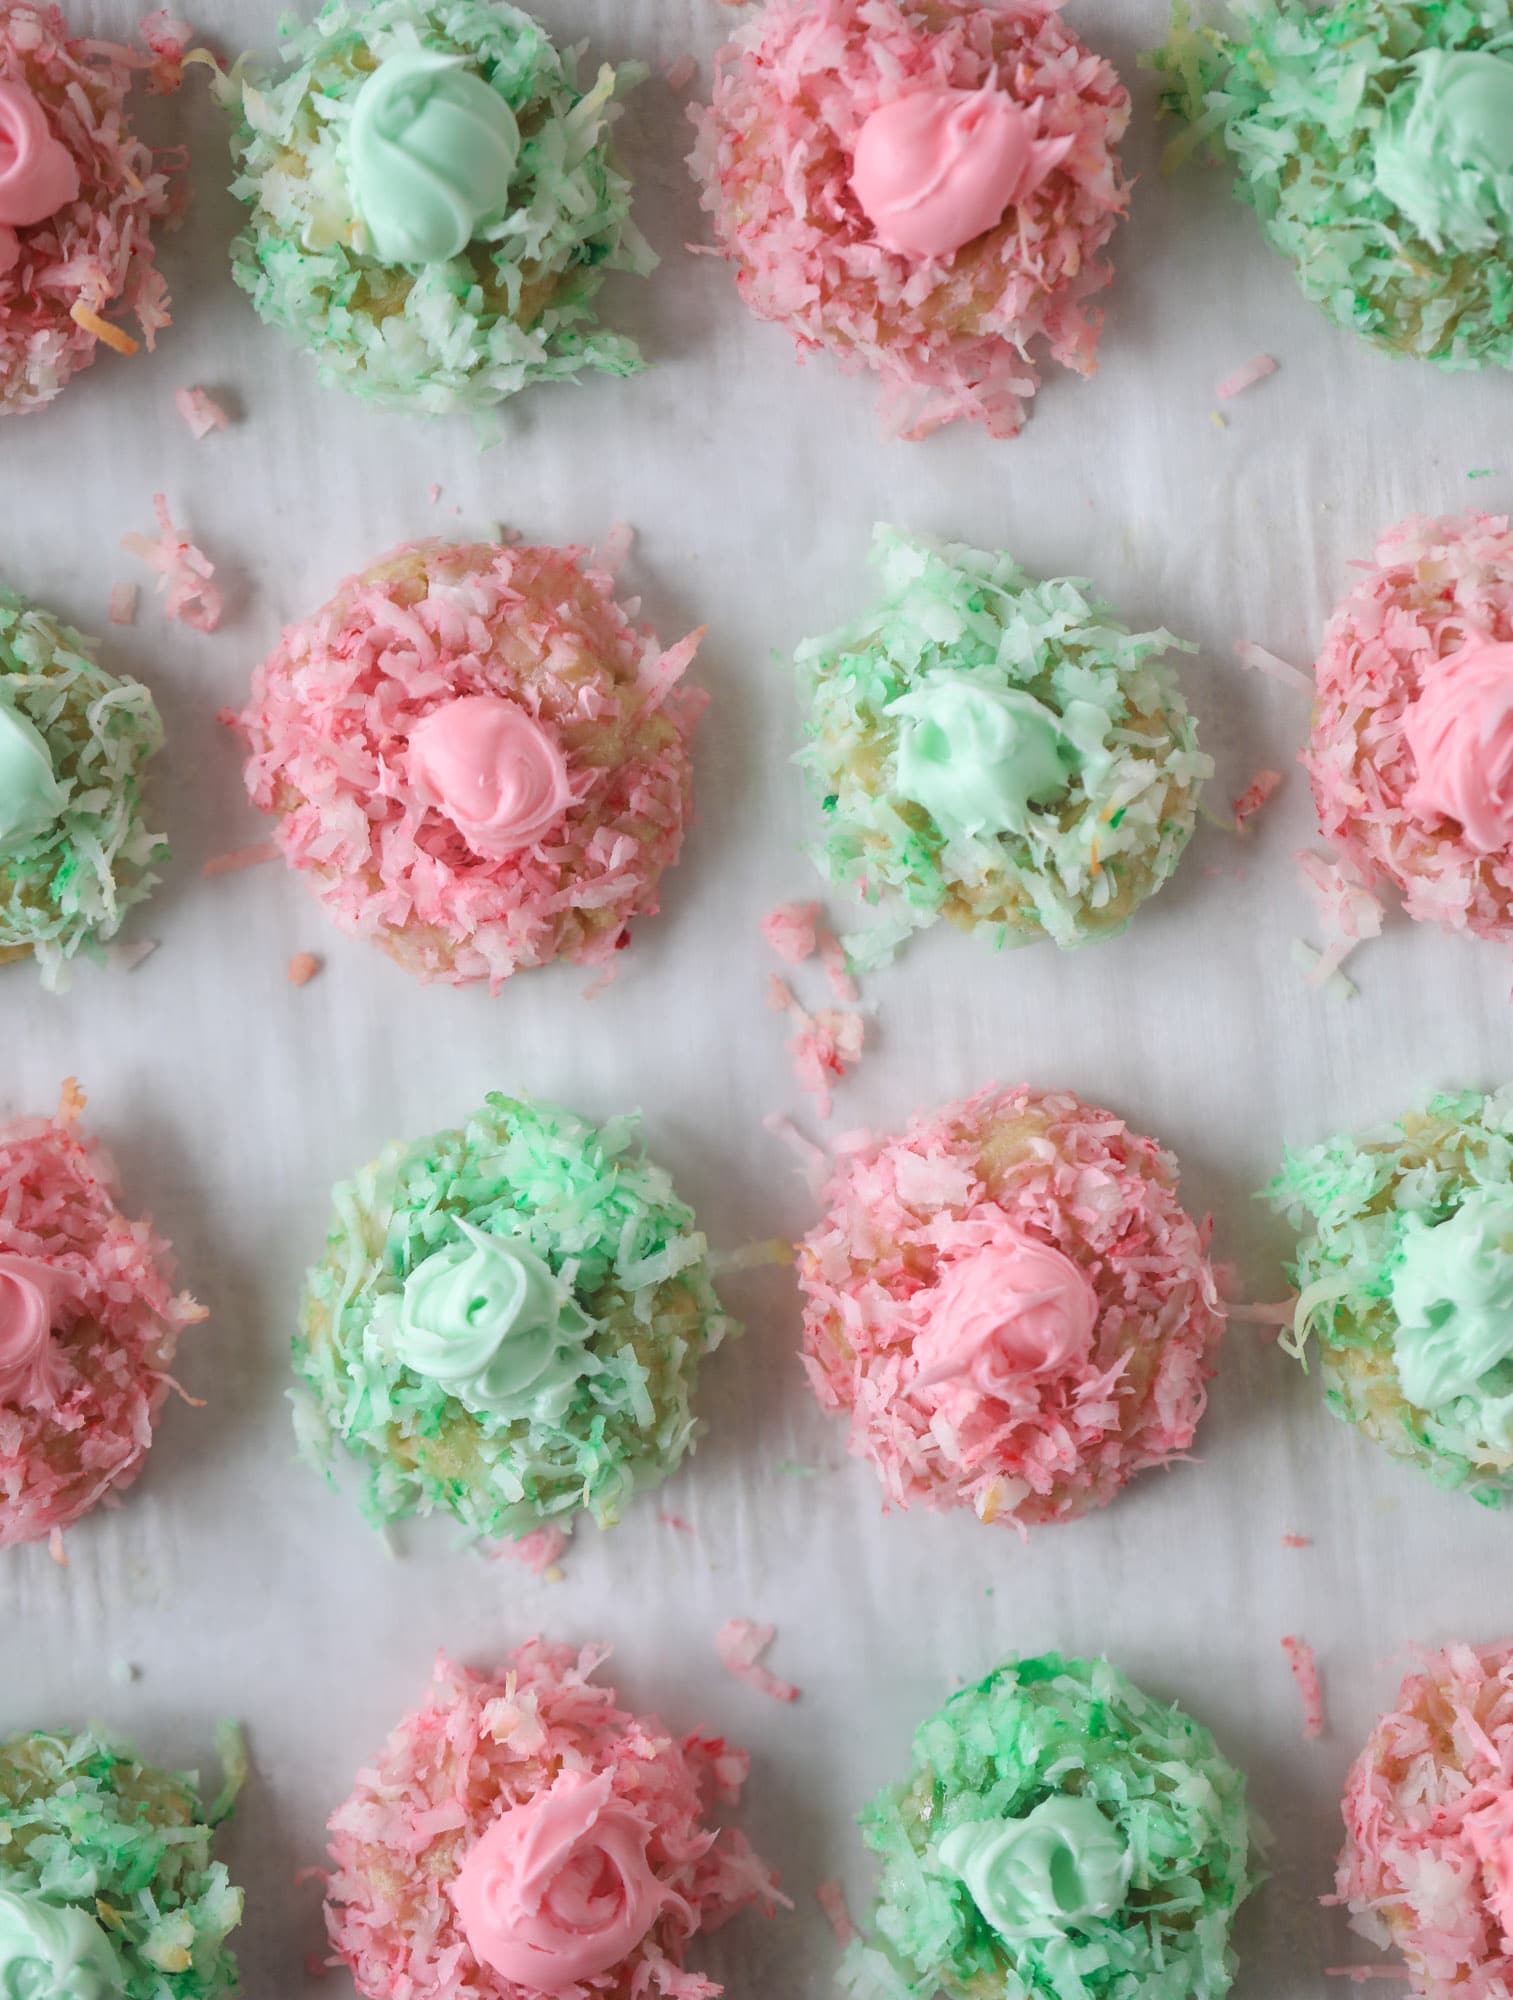 These thumbprint cookies are so perfect for the holiday season. The best butter thumbprint rolled in pink and green coconut and filled with buttercream. So festive! I personally think they look like Grinch cookies - kids love them! I howsweeteats.com #thumbprint #cookies